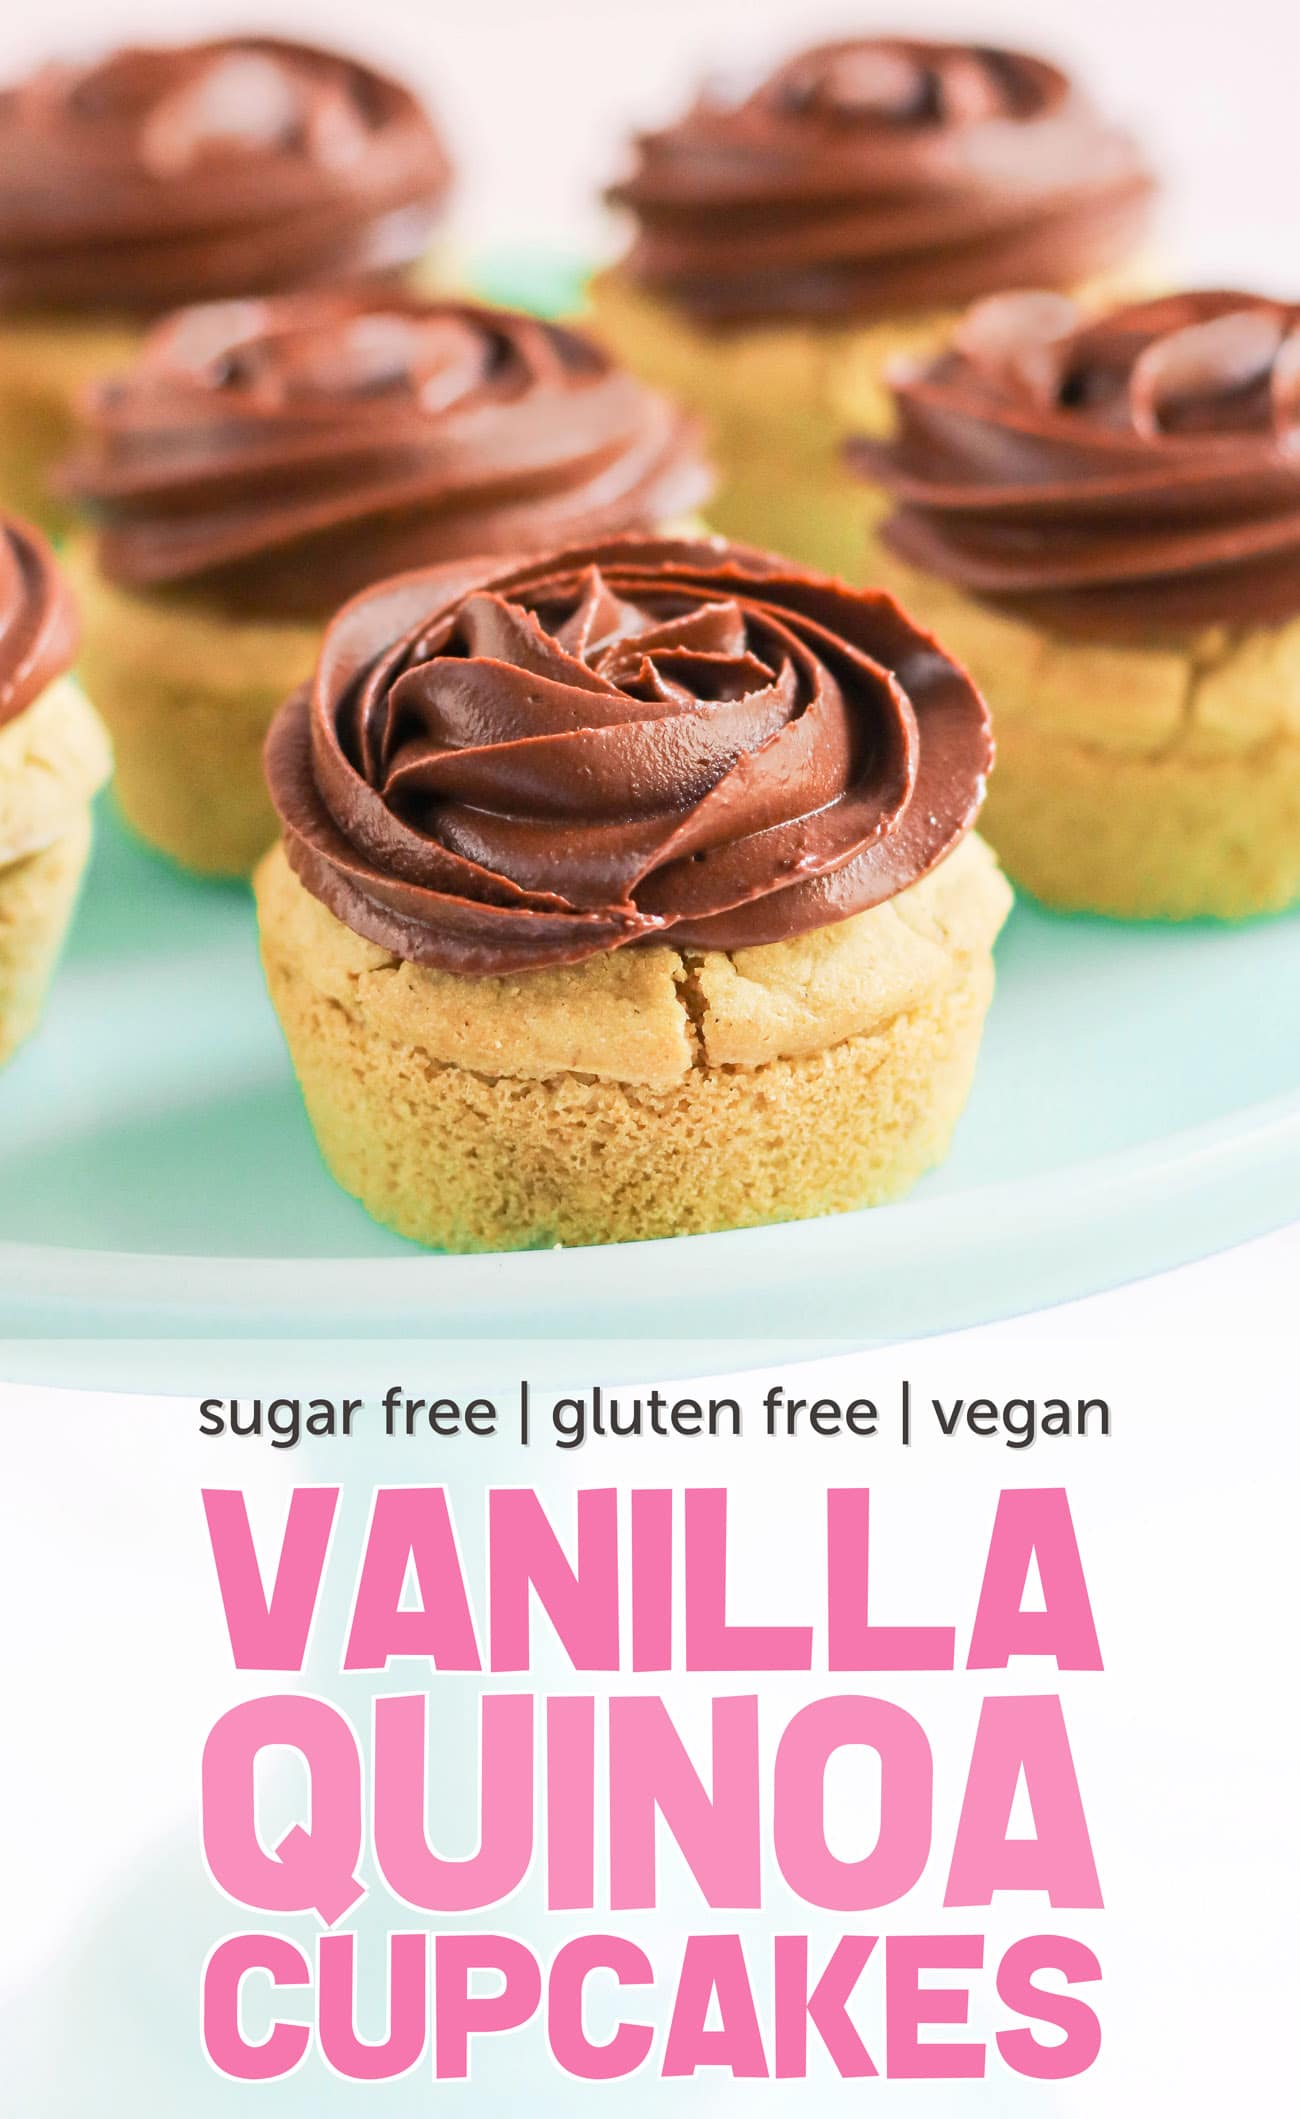 These Healthy Vanilla Quinoa Cupcakes are fluffy, springy, and moist! Top them with a healthy frosting and you've got the most nutritious, guilt-free treat! Made with quinoa flour, sorghum flour, coconut yogurt, and coconut milk, so they're gluten free, dairy free, vegan, and sugar free!